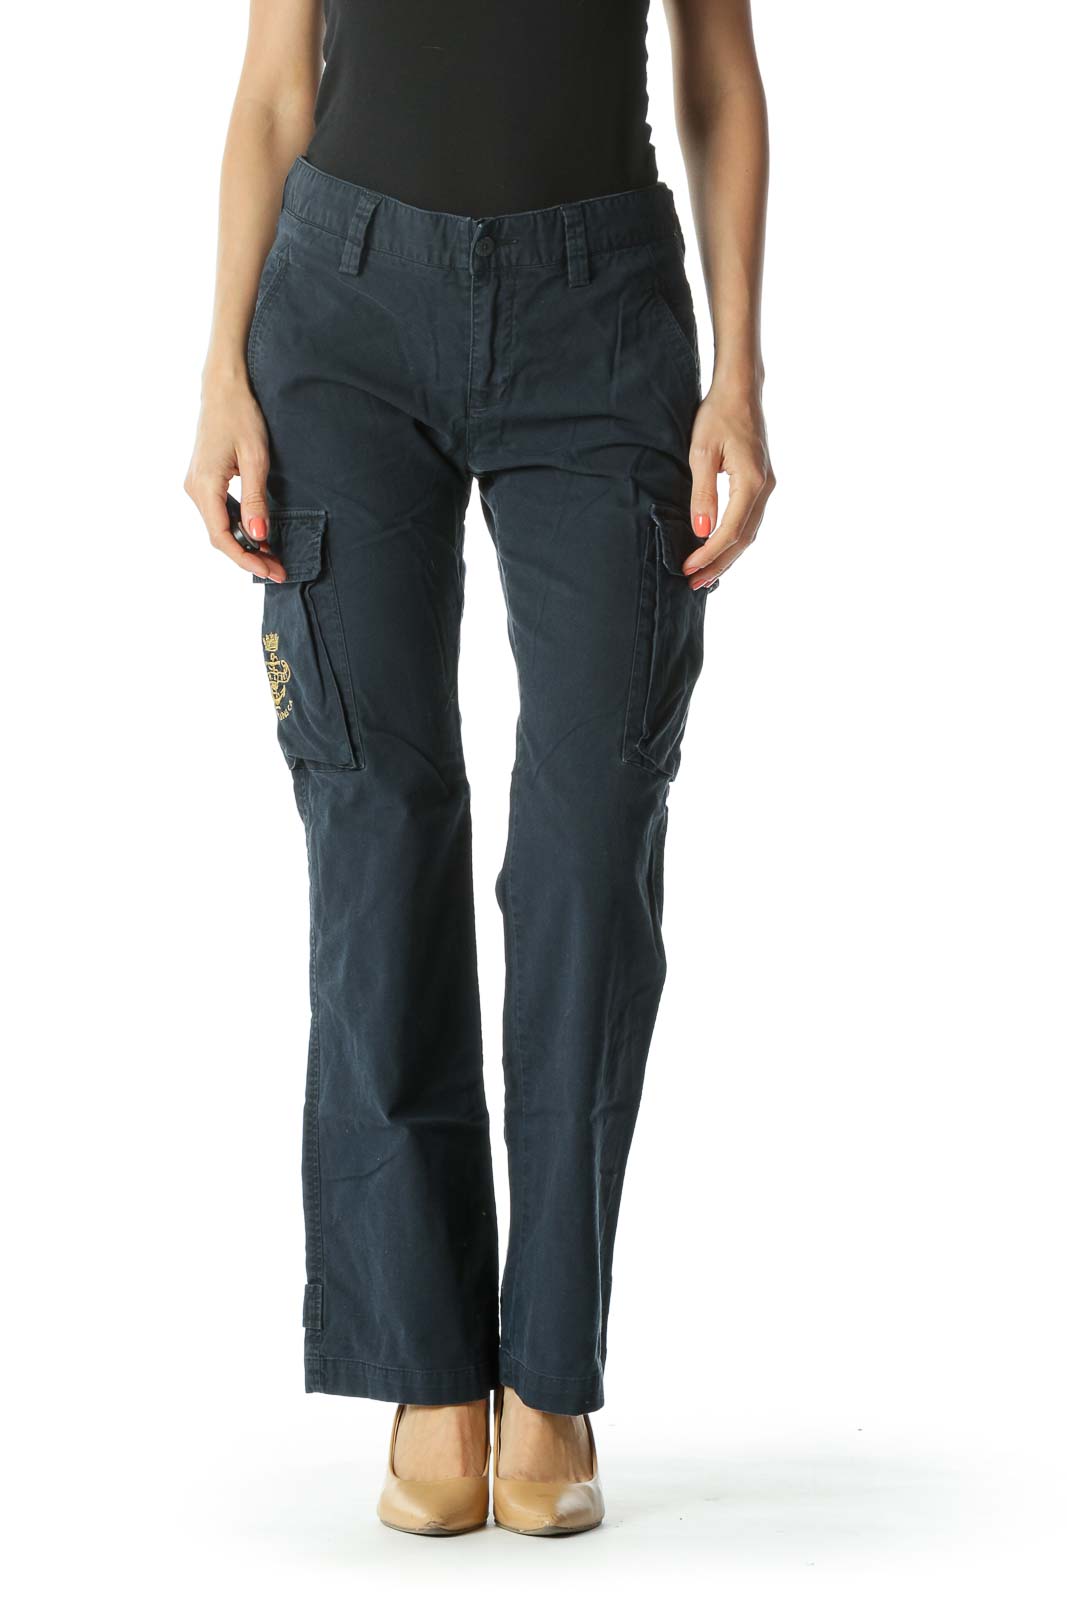 Navy Cargo Pants with Leg Pockets and Gold Embroiderey Front